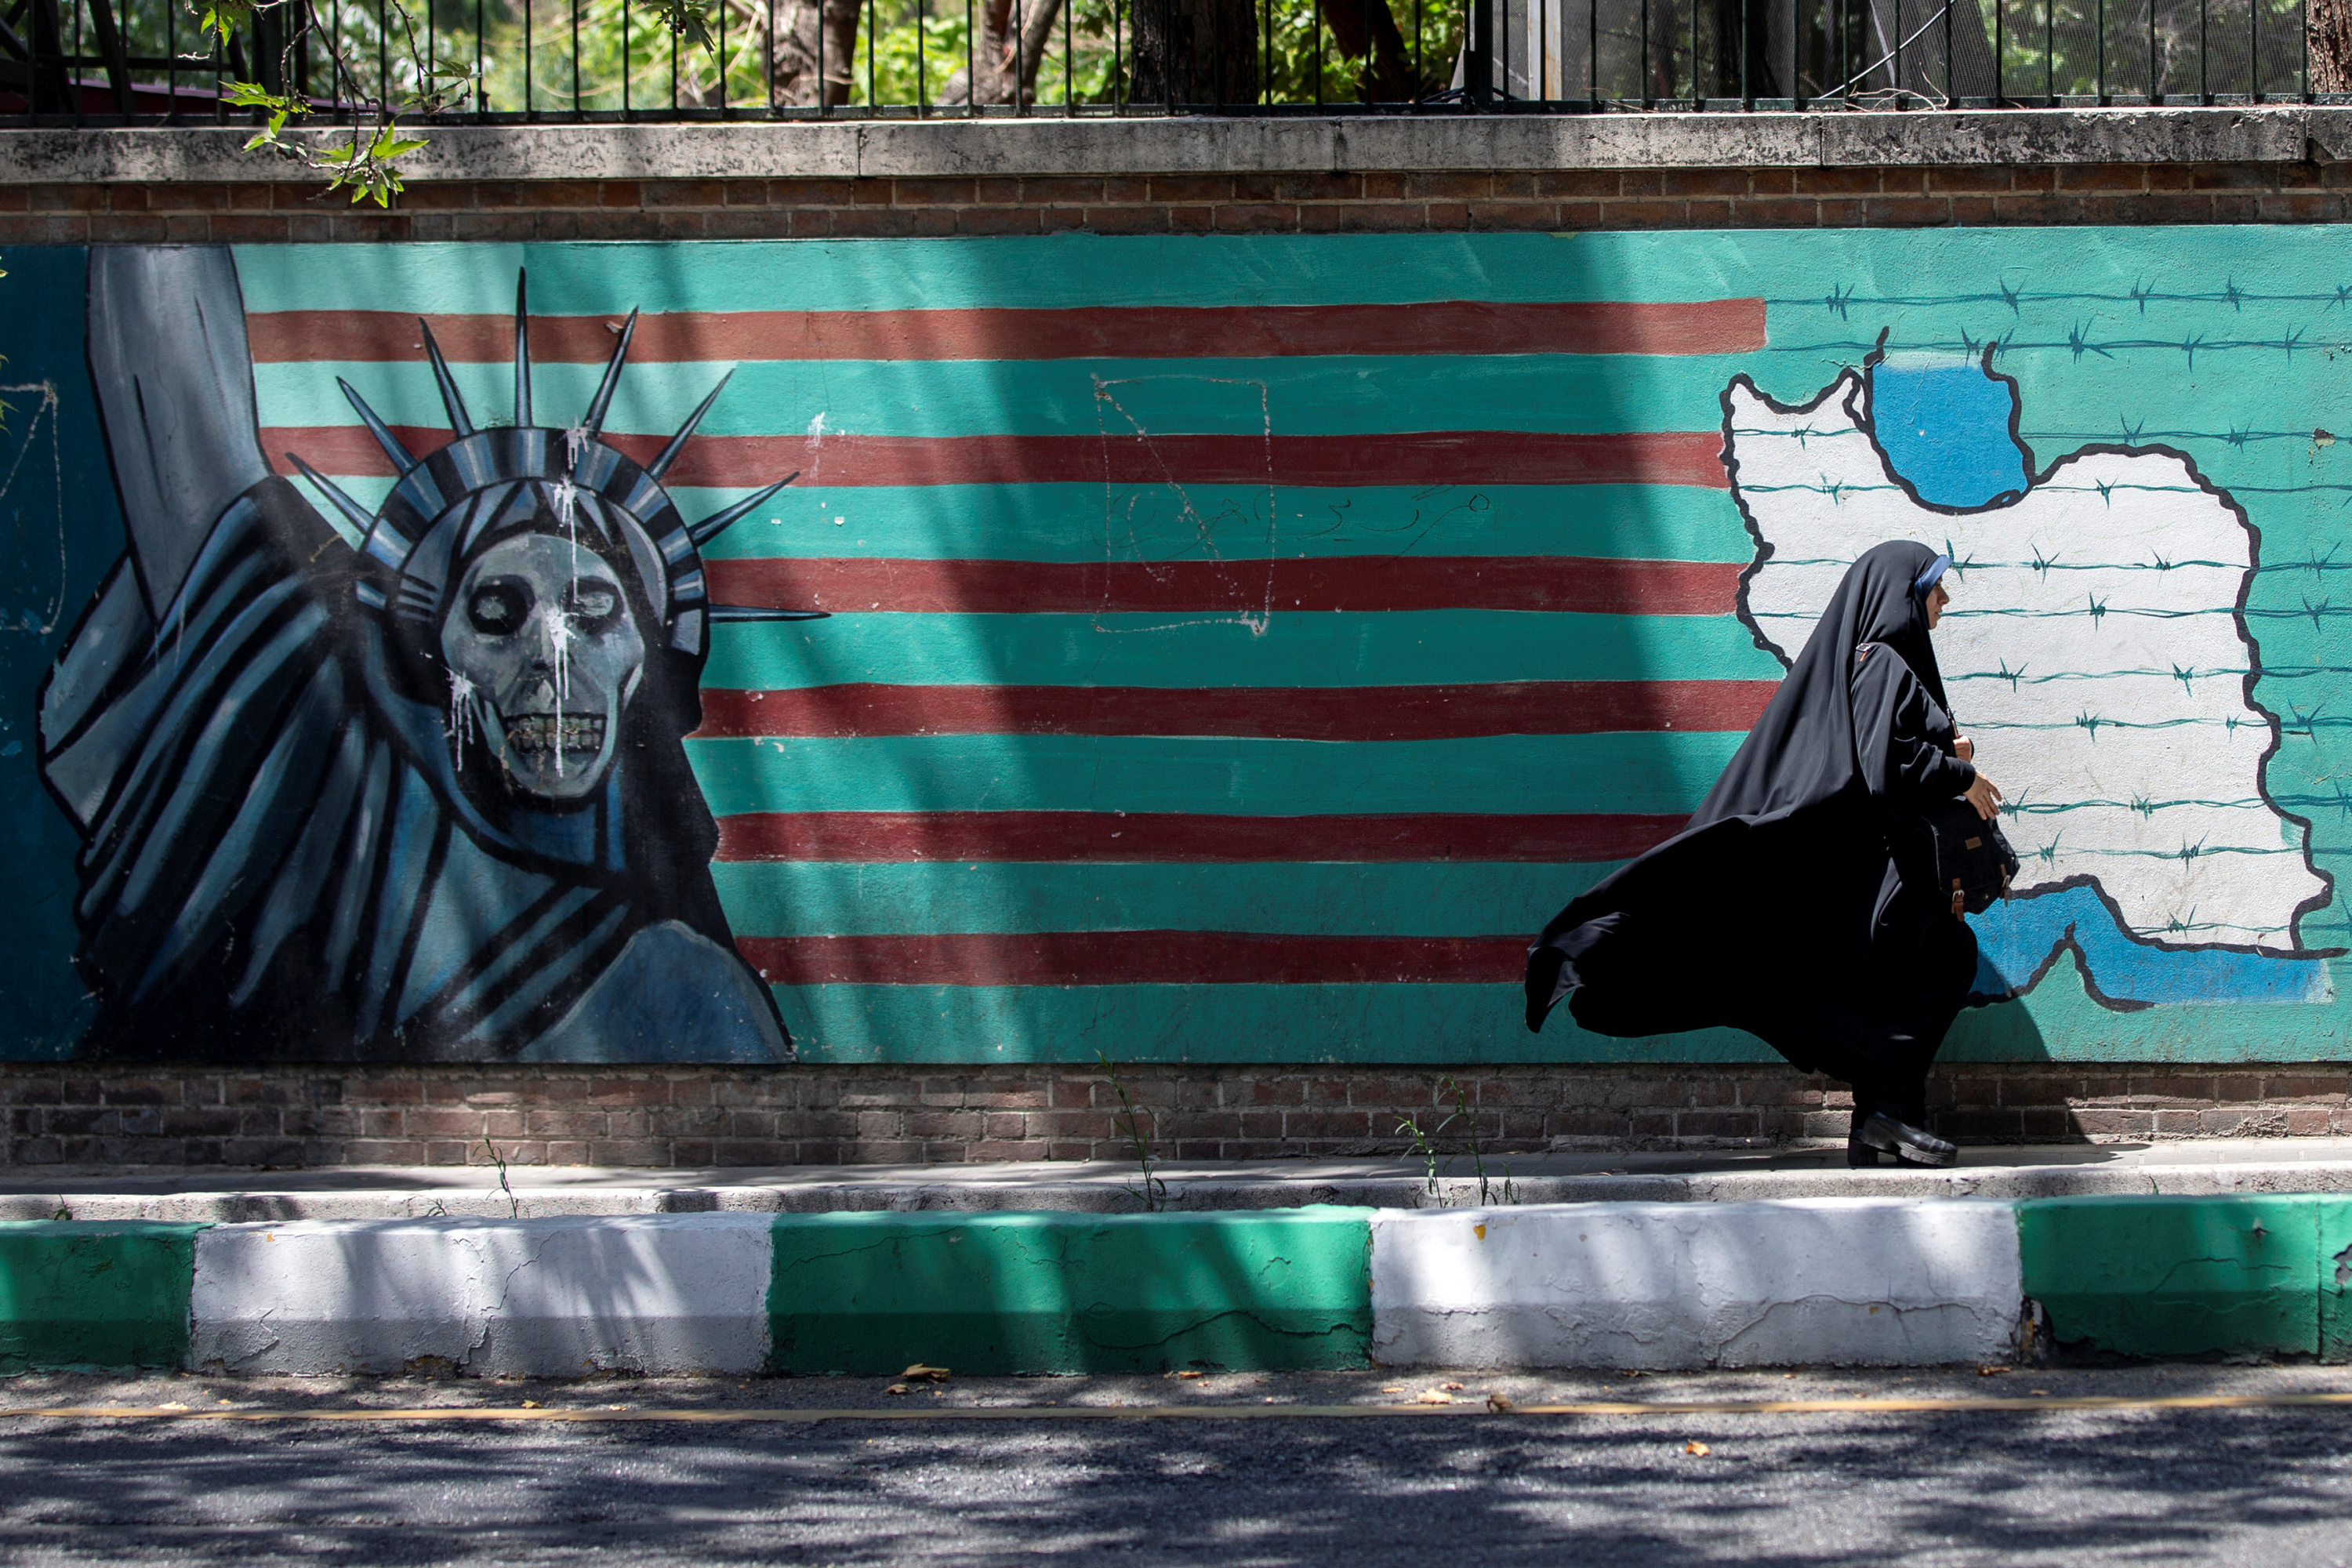 A woman walks past the mural showing U.S. flag with barbed wire and the Statue Of Liberty with skull face in Tehran, Iran June 25, 2019.  Nazanin Tabatabaee/Nazanin Tabatabaee/West Asia News Agency via REUTERS/File Photo